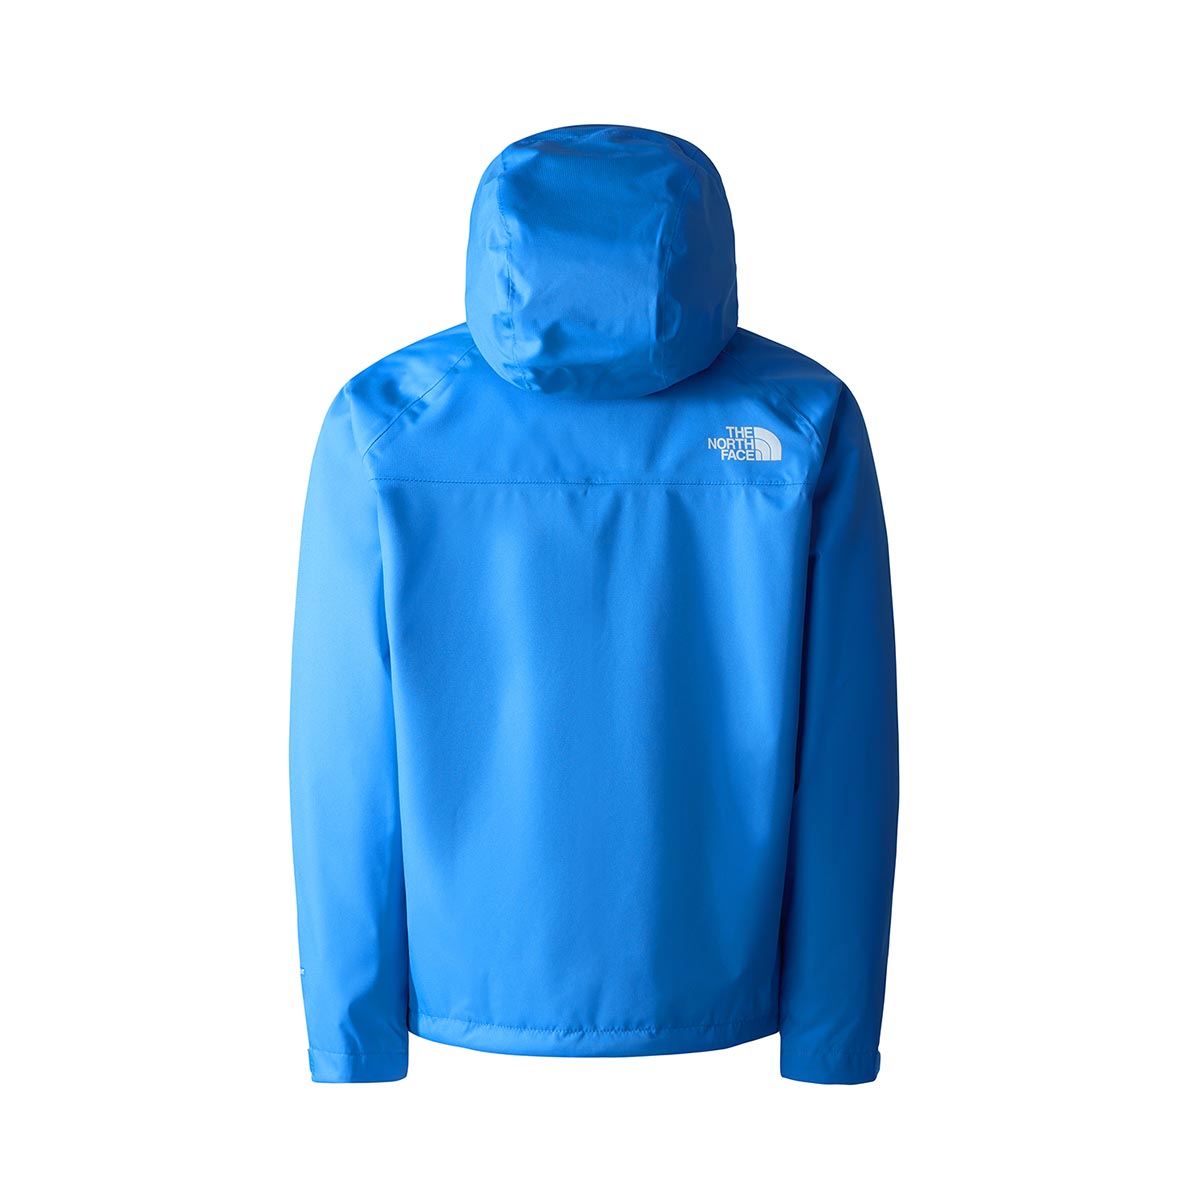 THE NORTH FACE - BOYS VORTEX TRICLIMATE 3-IN-1 JACKET